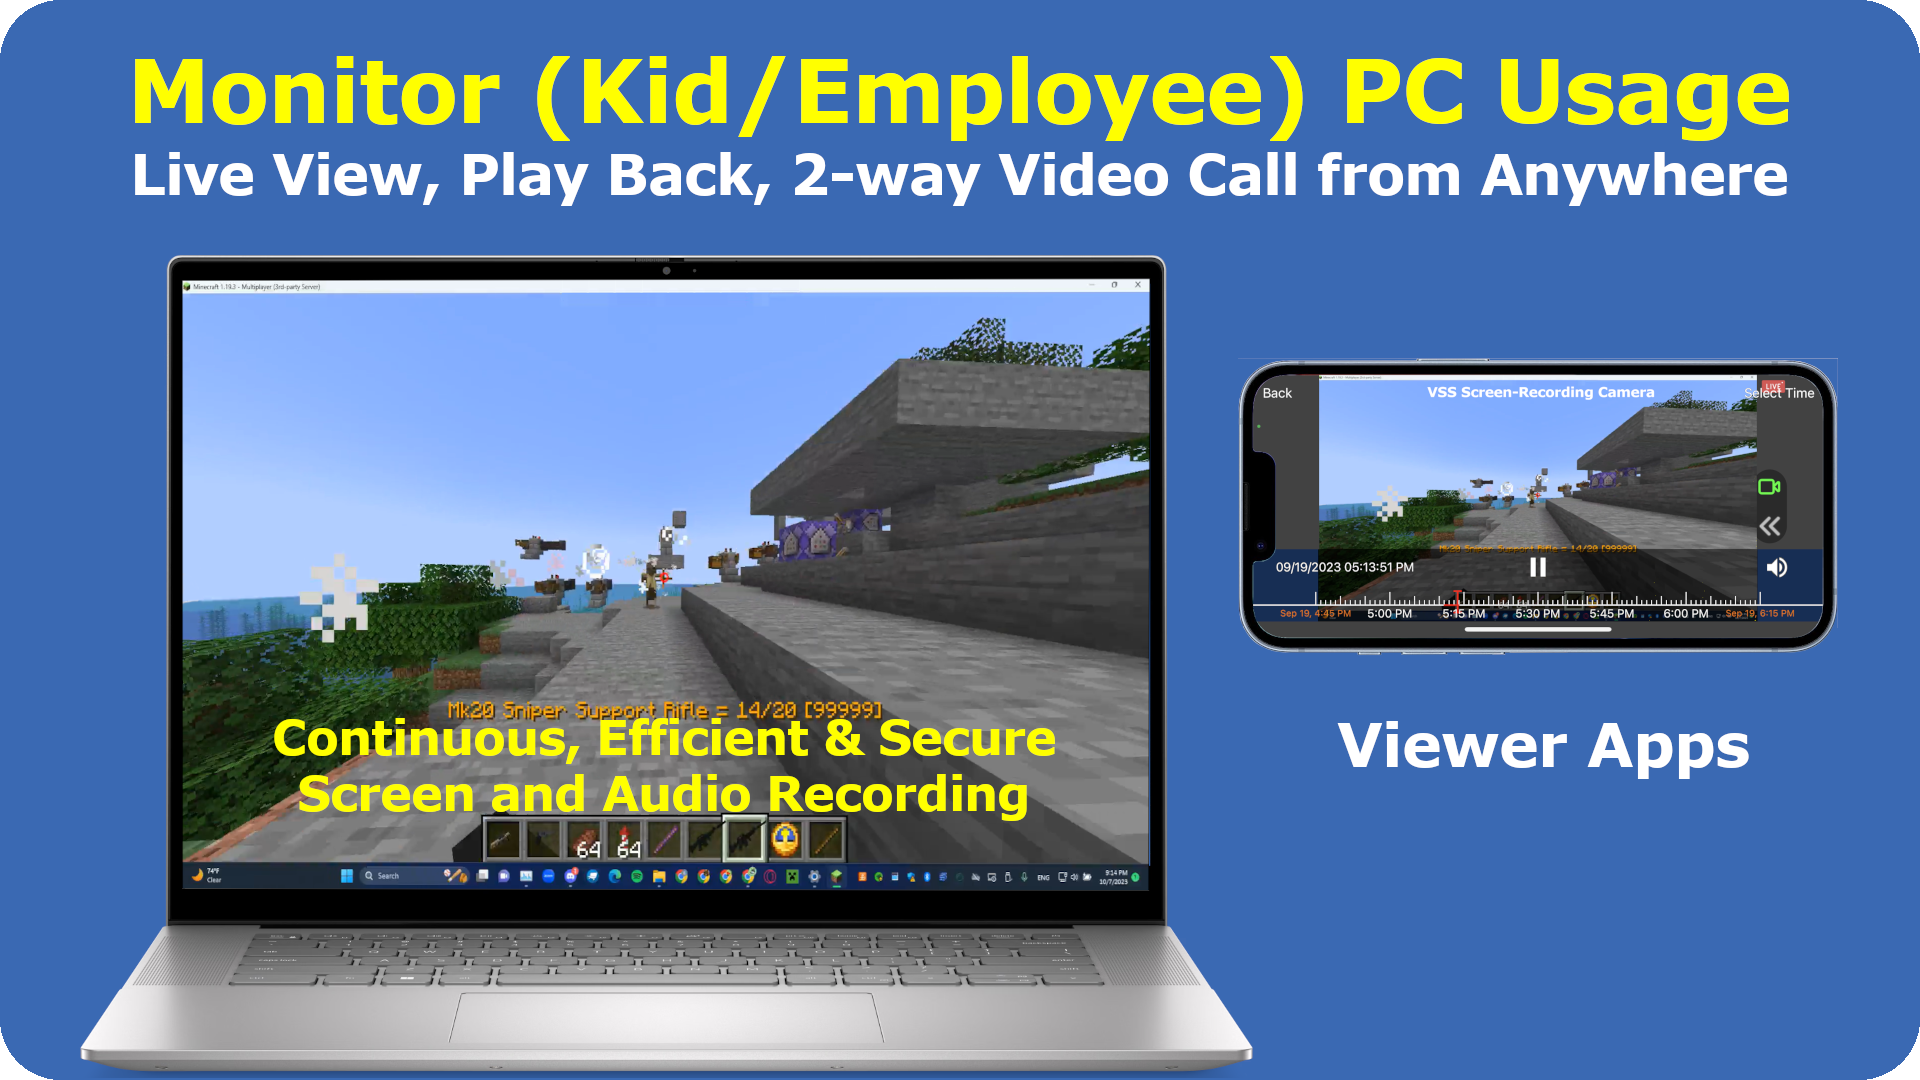 Monitor kid/employee PC usage. Efficiently and securely record footage. Real-time PC usage monitoring, or play back recorded footage.